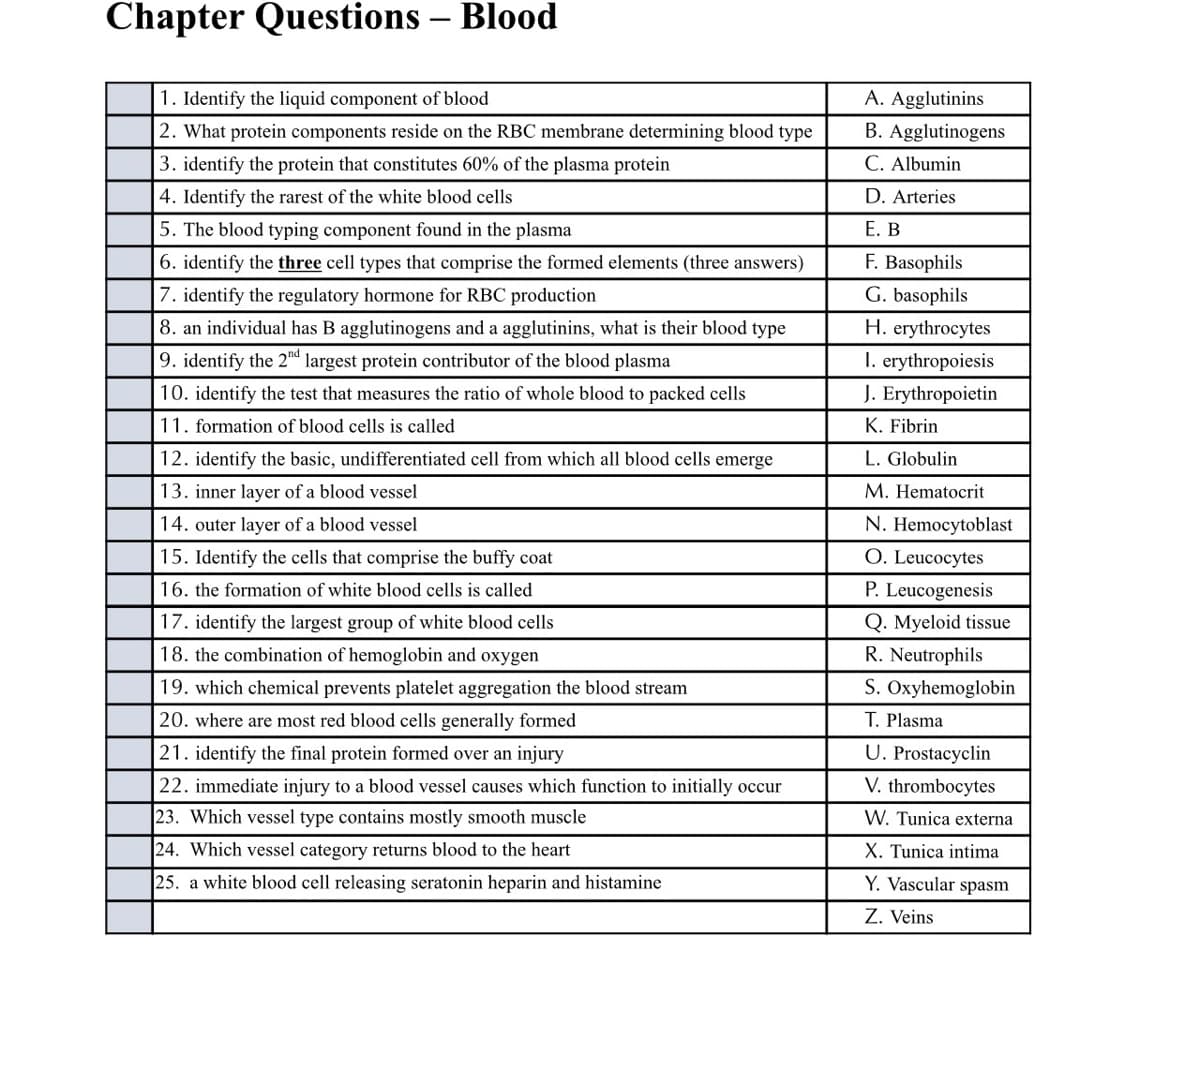 Chapter Questions – Blood
1. Identify the liquid component of blood
A. Agglutinins
|2. What protein components reside on the RBC membrane determining blood type
Agglutinogens
3. identify the protein that constitutes 60% of the plasma protein
C. Albumin
4. Identify the rarest of the white blood cells
D. Arteries
5. The blood typing component found in the plasma
E. B
F. Basophils
G. basophils
6. identify the three cell types that comprise the formed elements (three answers)
7. identify the regulatory hormone for RBC production
8. an individual has B agglutinogens and a agglutinins, what is their blood type
9. identify the 2nd largest protein contributor of the blood plasma
H. erythrocytes
I. erythropoiesis
J. Erythropoietin
10. identify the test that measures the ratio of whole blood to packed cells
11. formation of blood cells is called
K. Fibrin
12. identify the basic, undifferentiated cell from which all blood cells emerge
L. Globulin
13. inner layer of a blood vessel
M. Hematocrit
14. outer layer of a blood vessel
N. Hemocytoblast
O. Leucocytes
P. Leucogenesis
15. Identify the cells that comprise the buffy coat
16. the formation of white blood cells is called
17. identify the largest group of white blood cells
Q. Myeloid tissue
18. the combination of hemoglobin and oxygen
R. Neutrophils
19. which chemical prevents platelet aggregation the blood stream
S. Oxyhemoglobin
20. where are most red blood cells generally formed
T. Plasma
U. Prostacyclin
V. thrombocytes
21. identify the final protein formed over an injury
22. immediate injury to a blood vessel causes which function to initially occur
23. Which vessel type contains mostly smooth muscle
W. Tunica externa
24. Which vessel category returns blood to the heart
X. Tunica intima
25. a white blood cell releasing seratonin heparin and histamine
Y. Vascular spasm
Z. Veins
